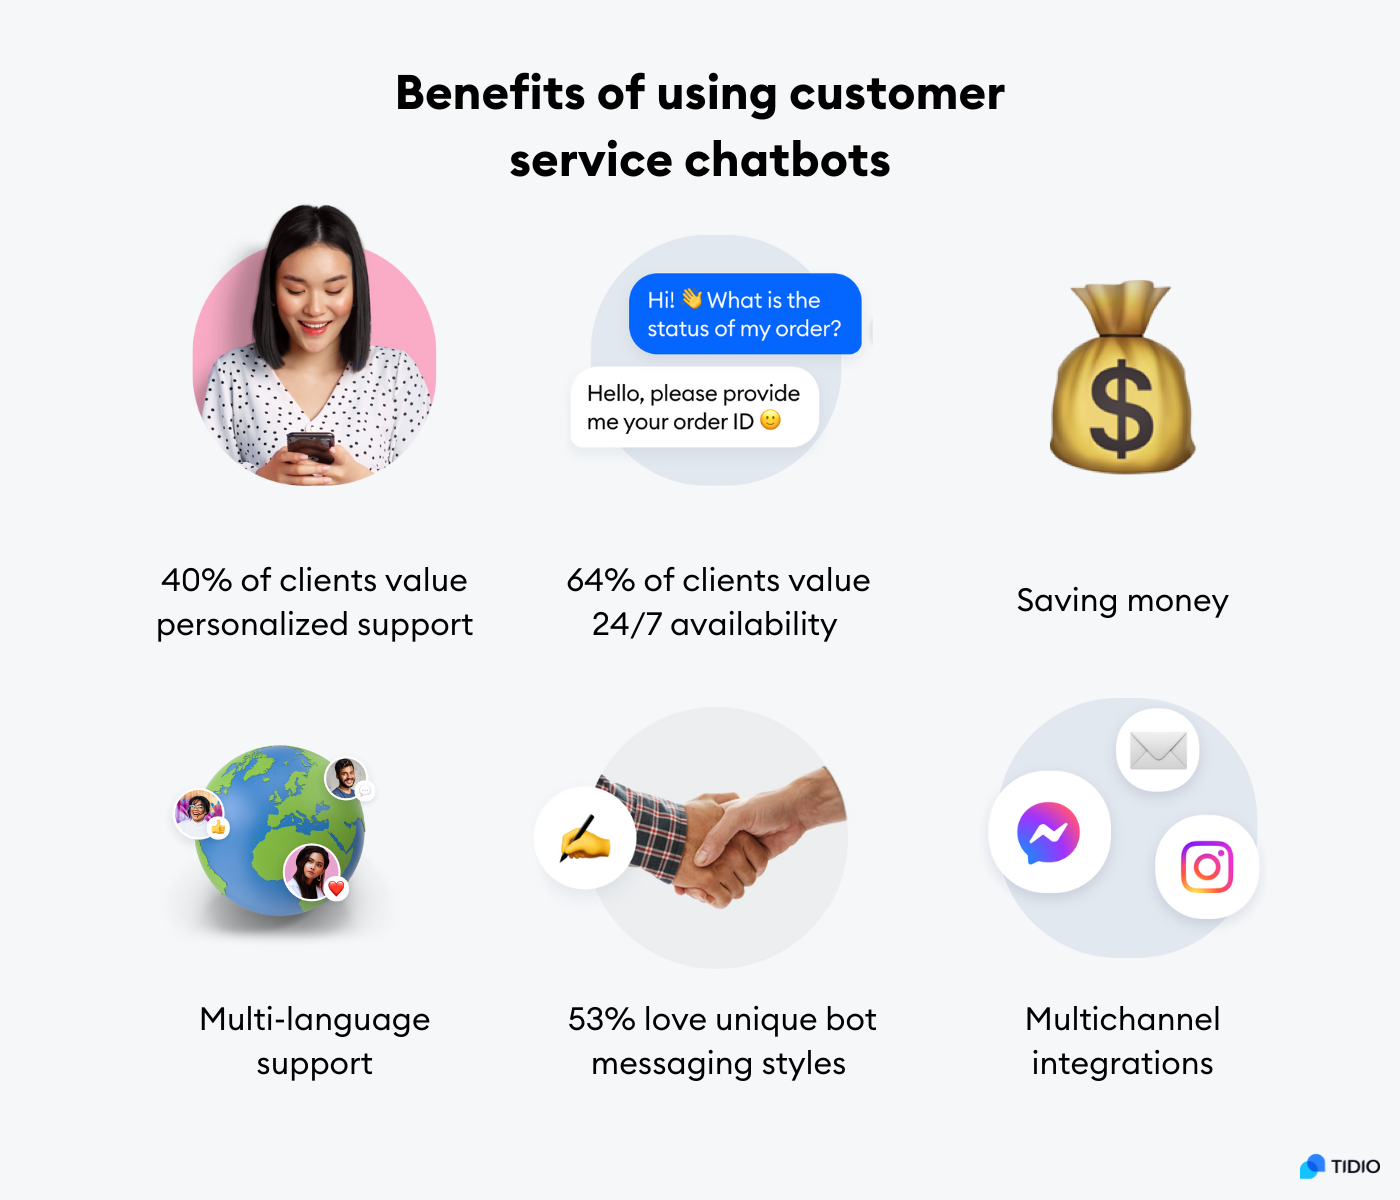 Benefits of chatbots in customer service